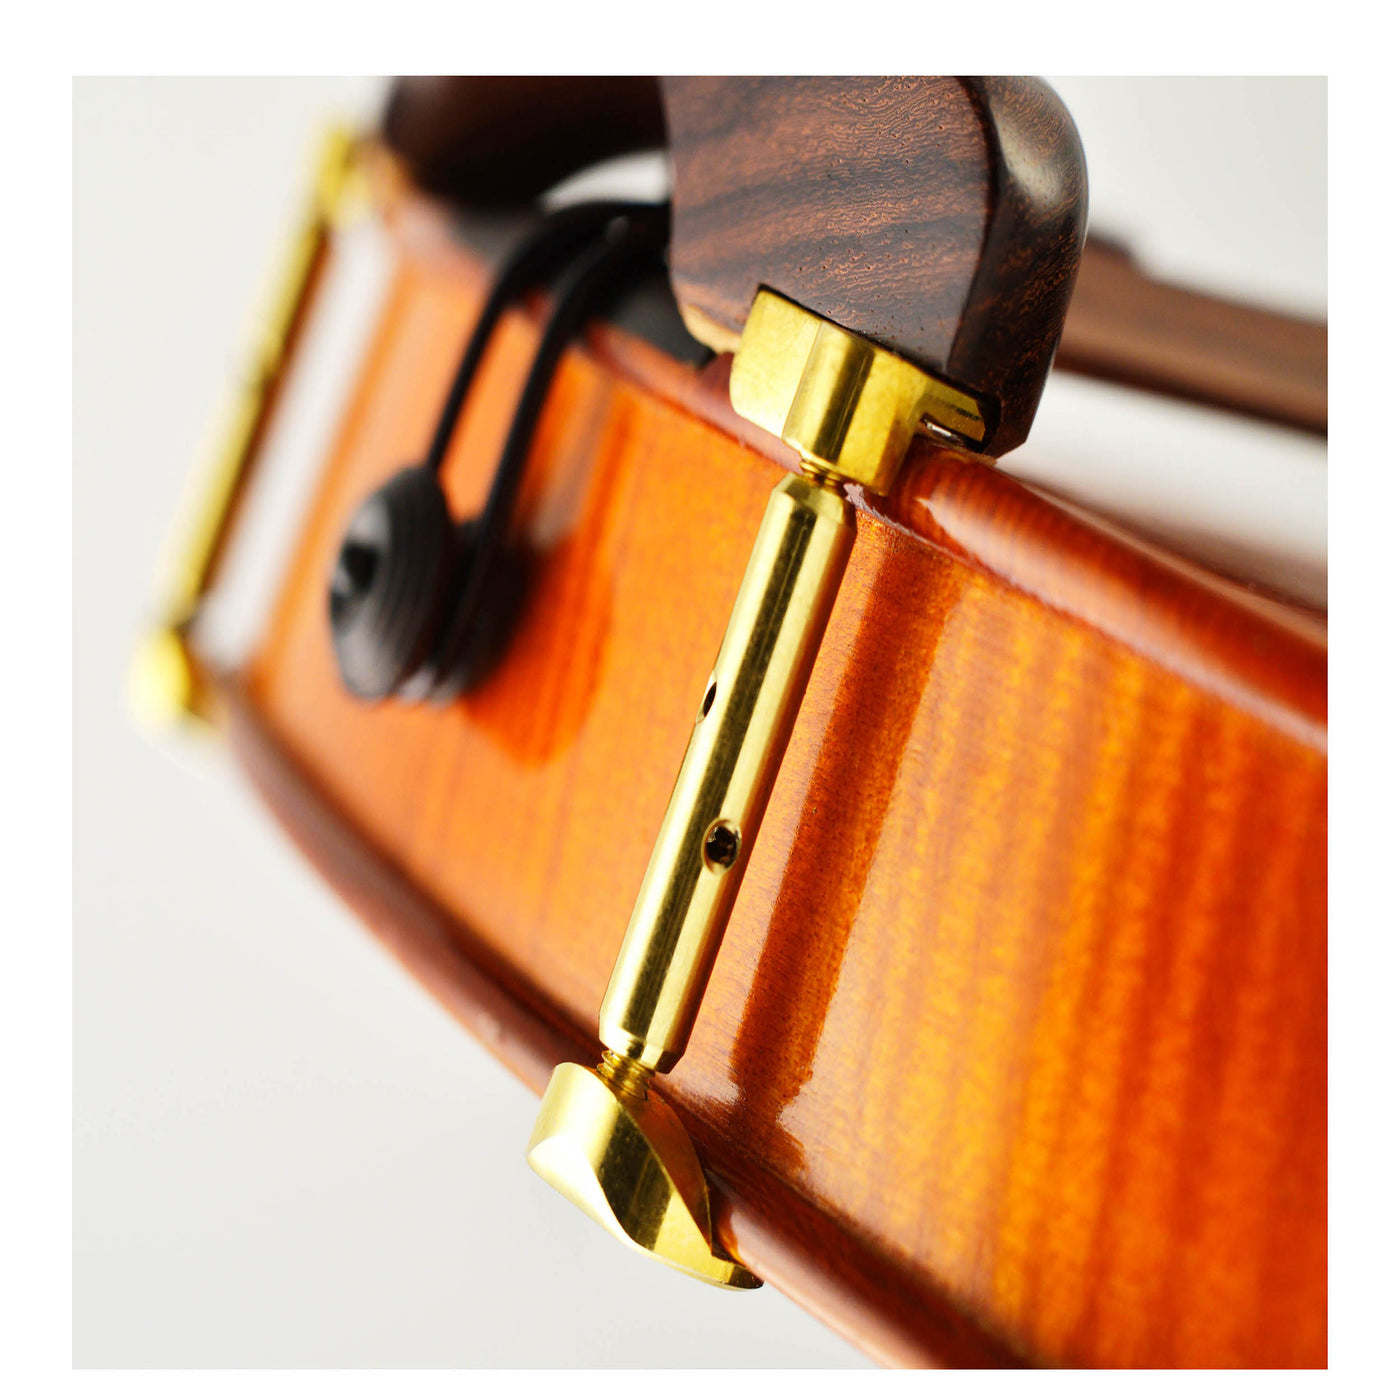 Milano Chinrest Violin 4/4 in Rosewood, ZK-273G